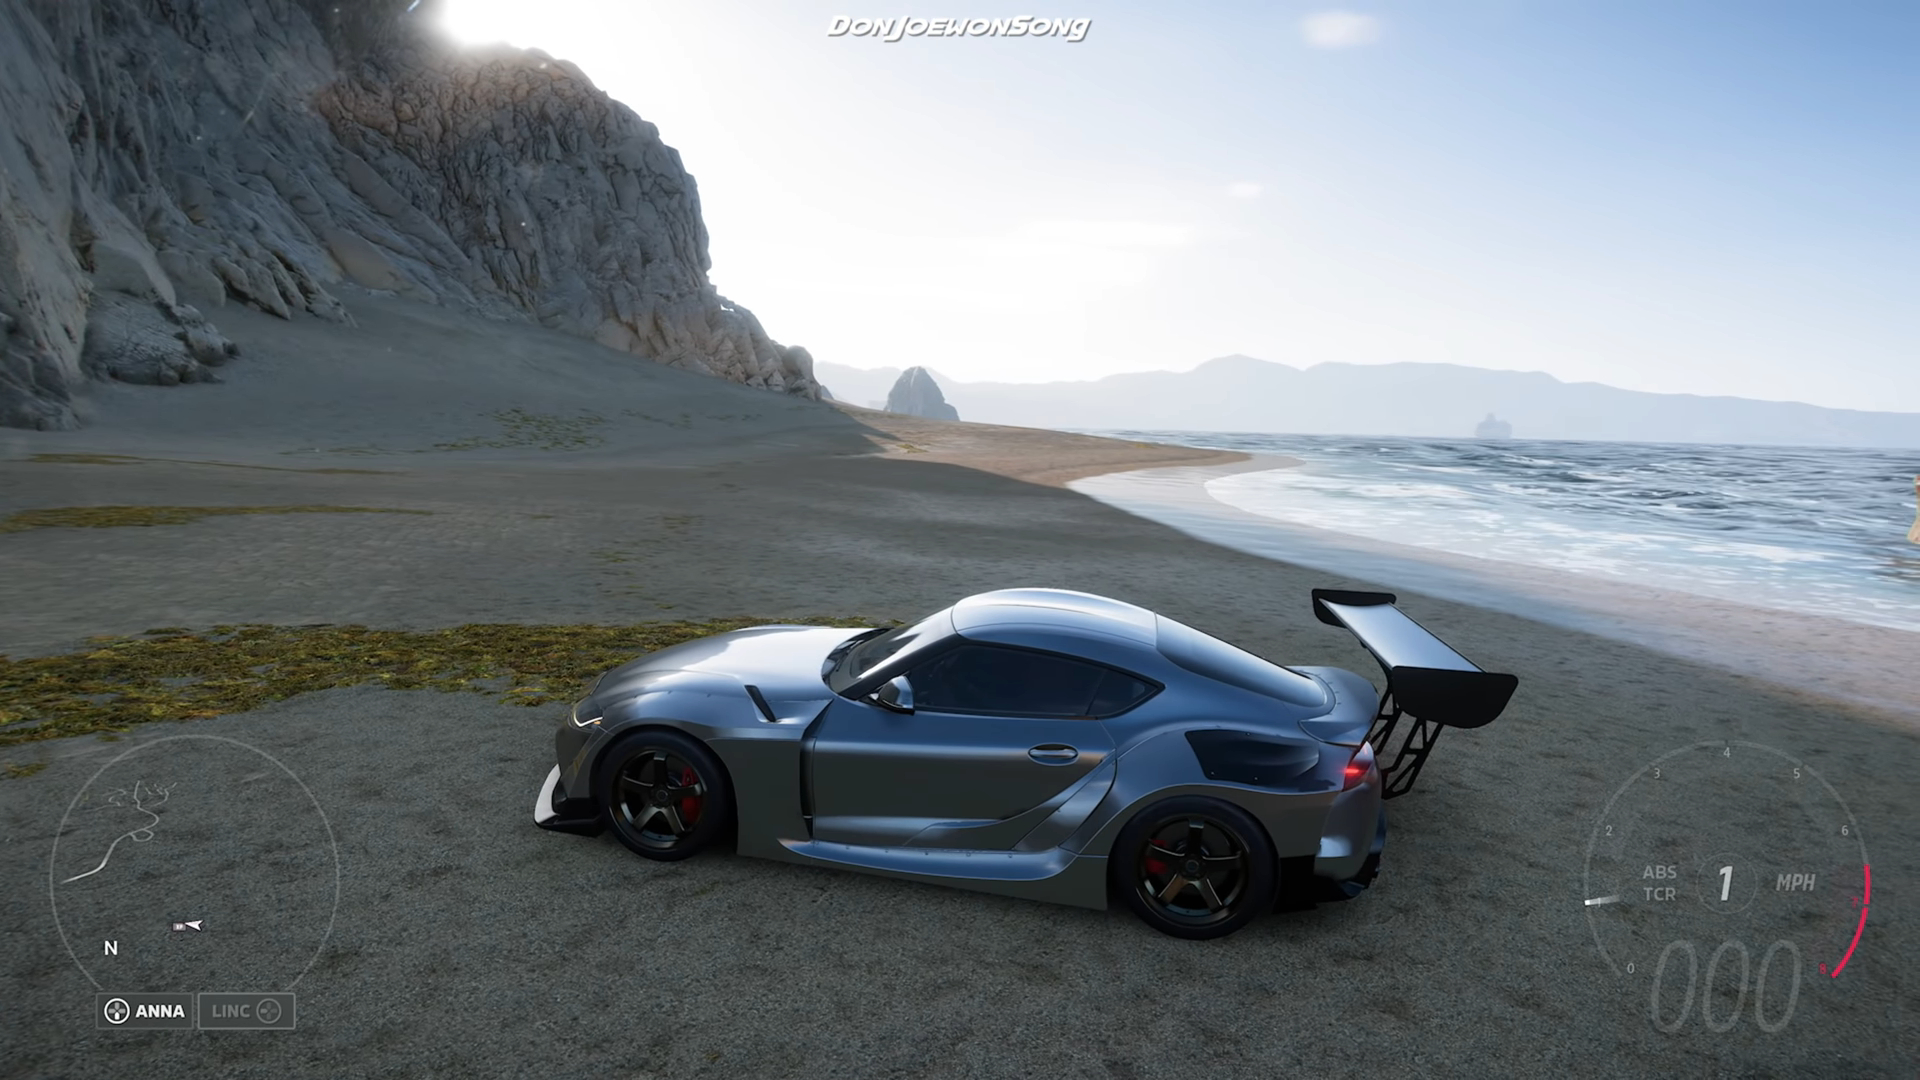 Watch: Forza Horizon 5 Gameplay Videos Featuring 2020 Toyota Supra and